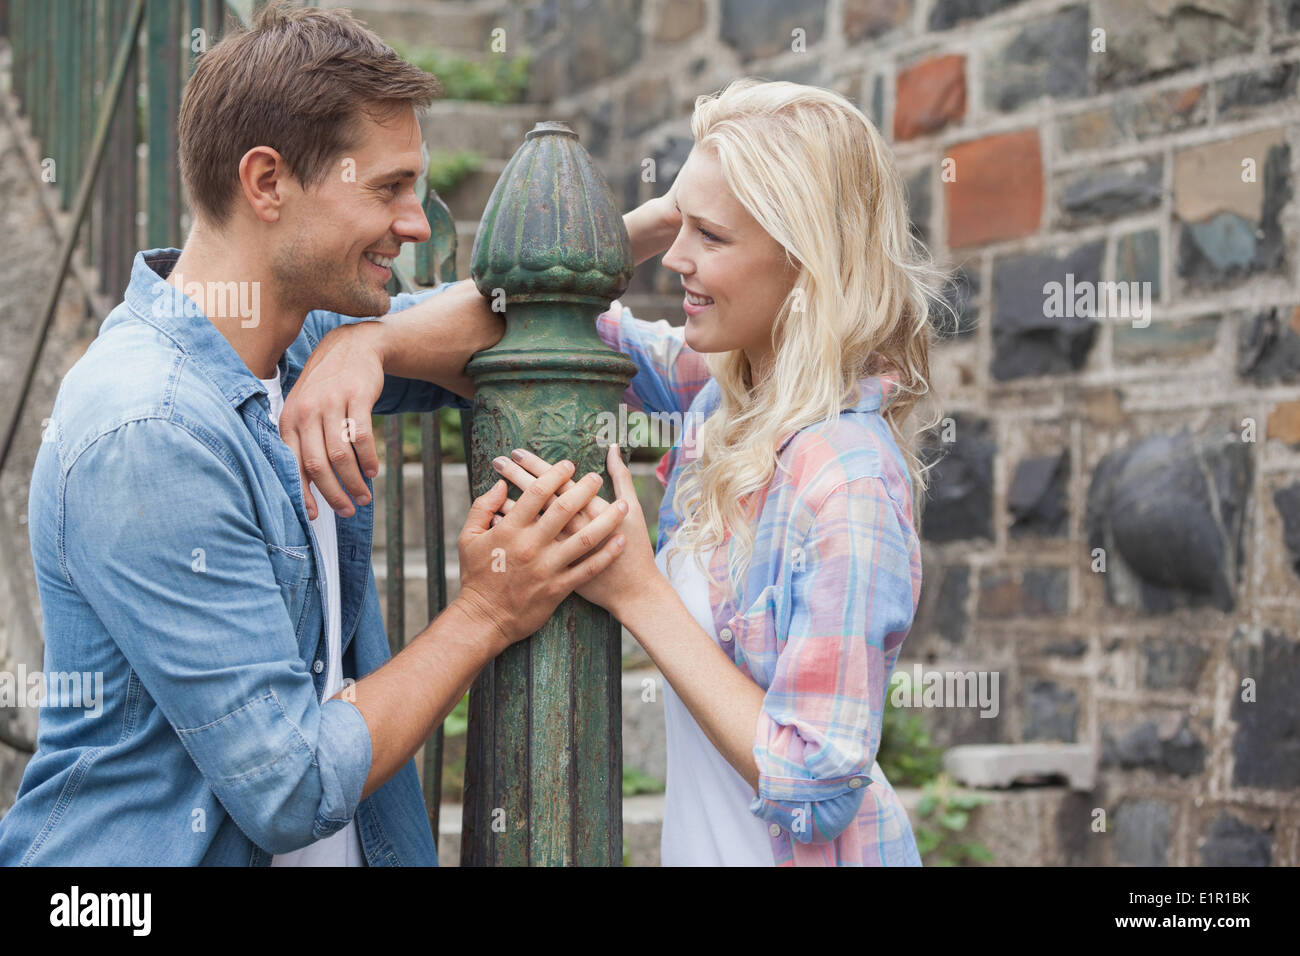 Hip young couple smiling at each other by railings Stock Photo